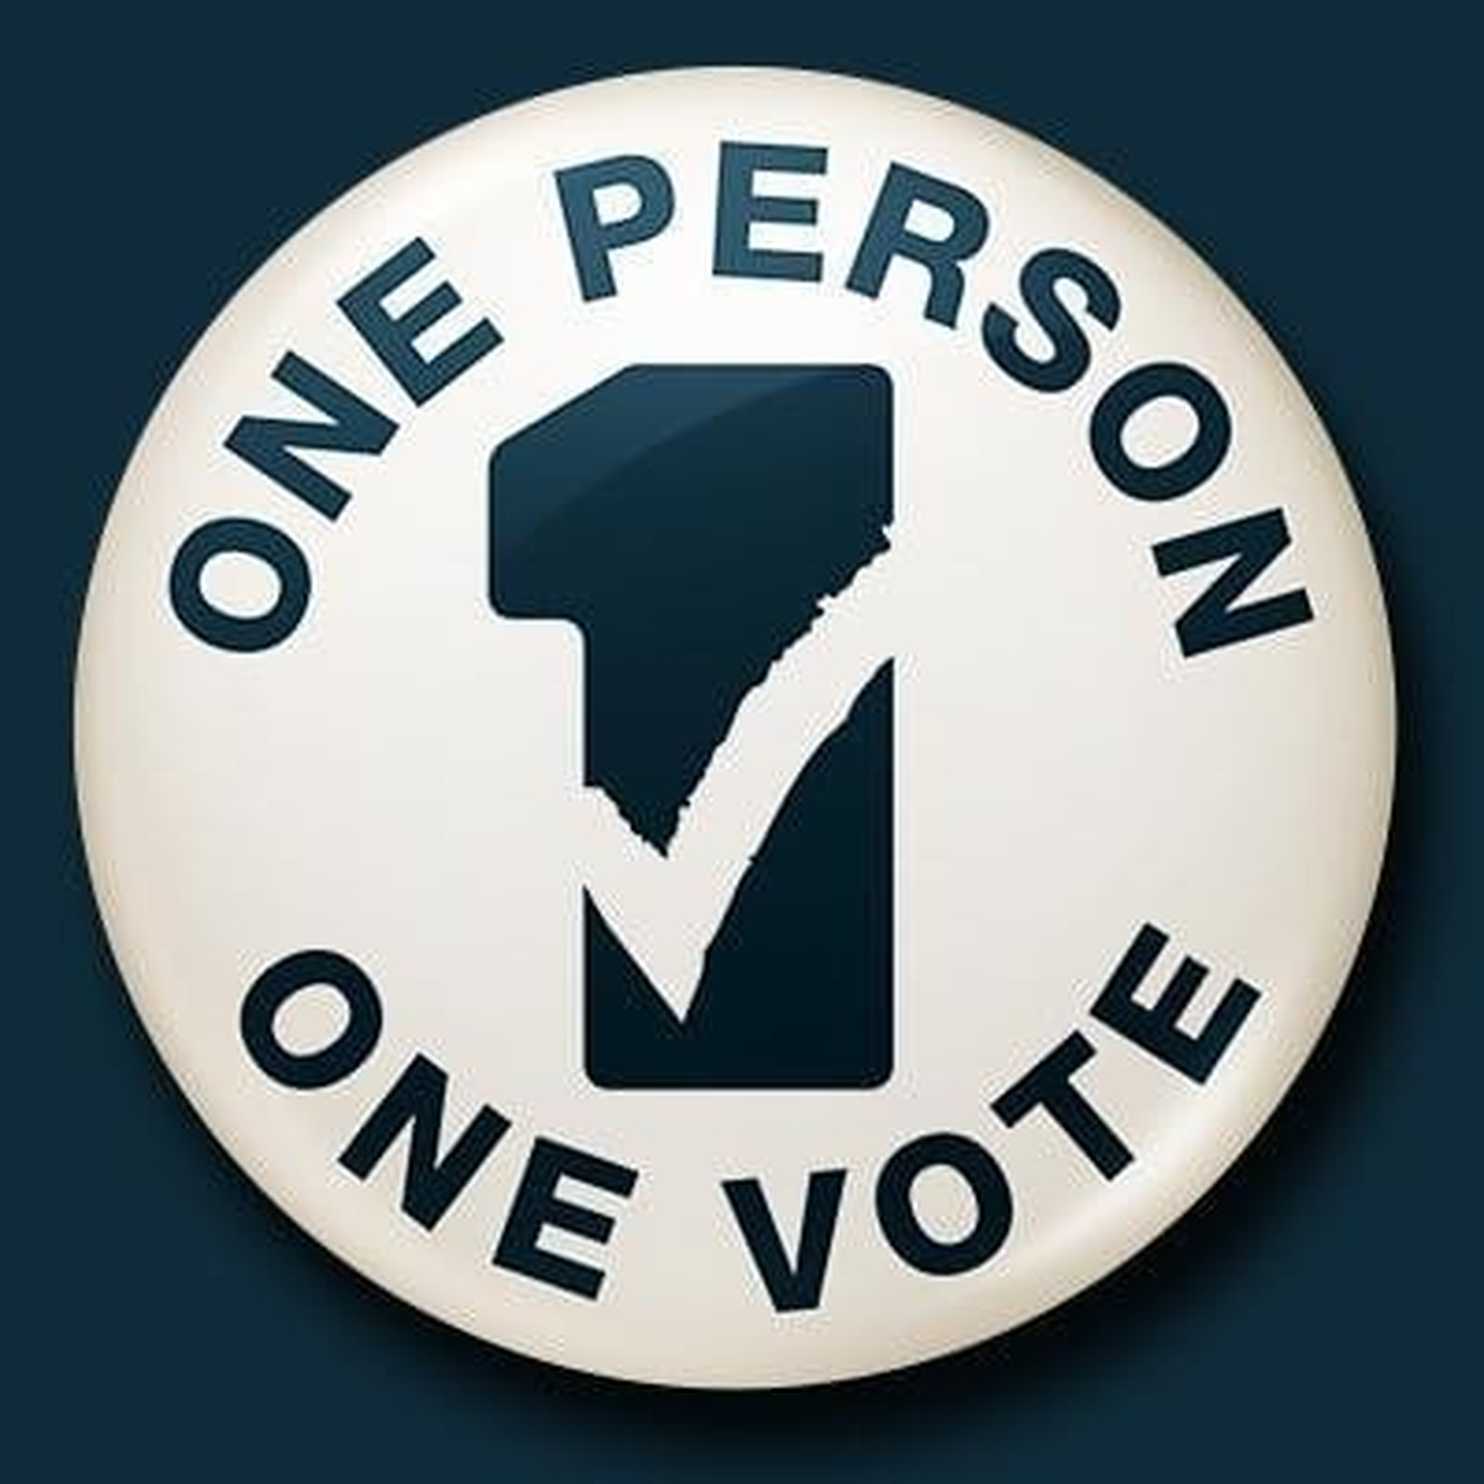 1 Person Logo - Thoughts on today's “one person, one vote” decision Washington